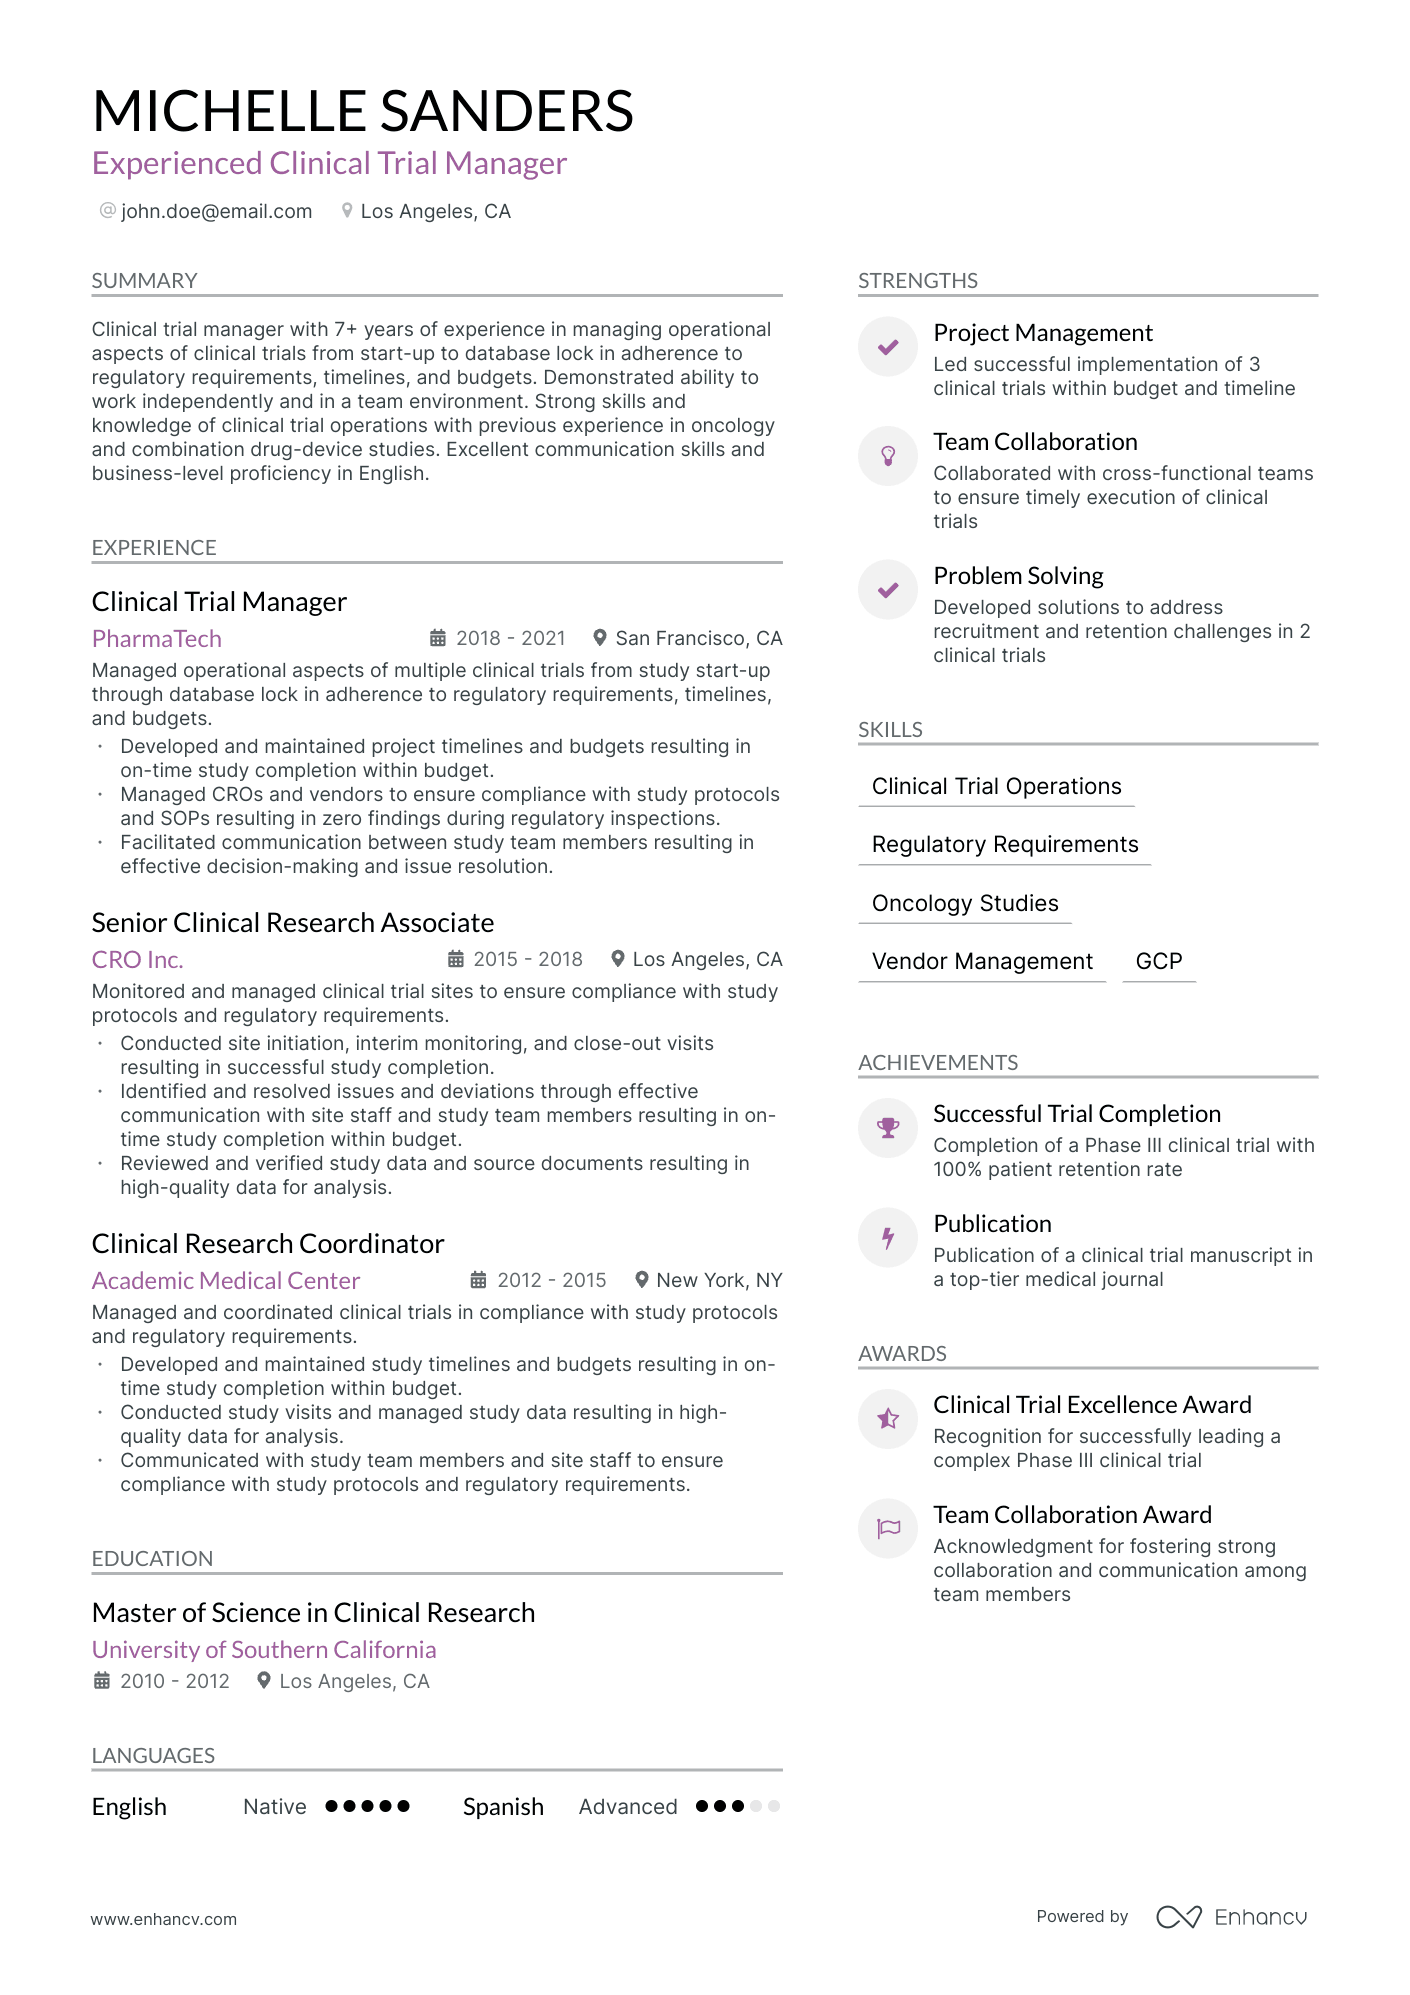 Clinical Trial Manager resume example